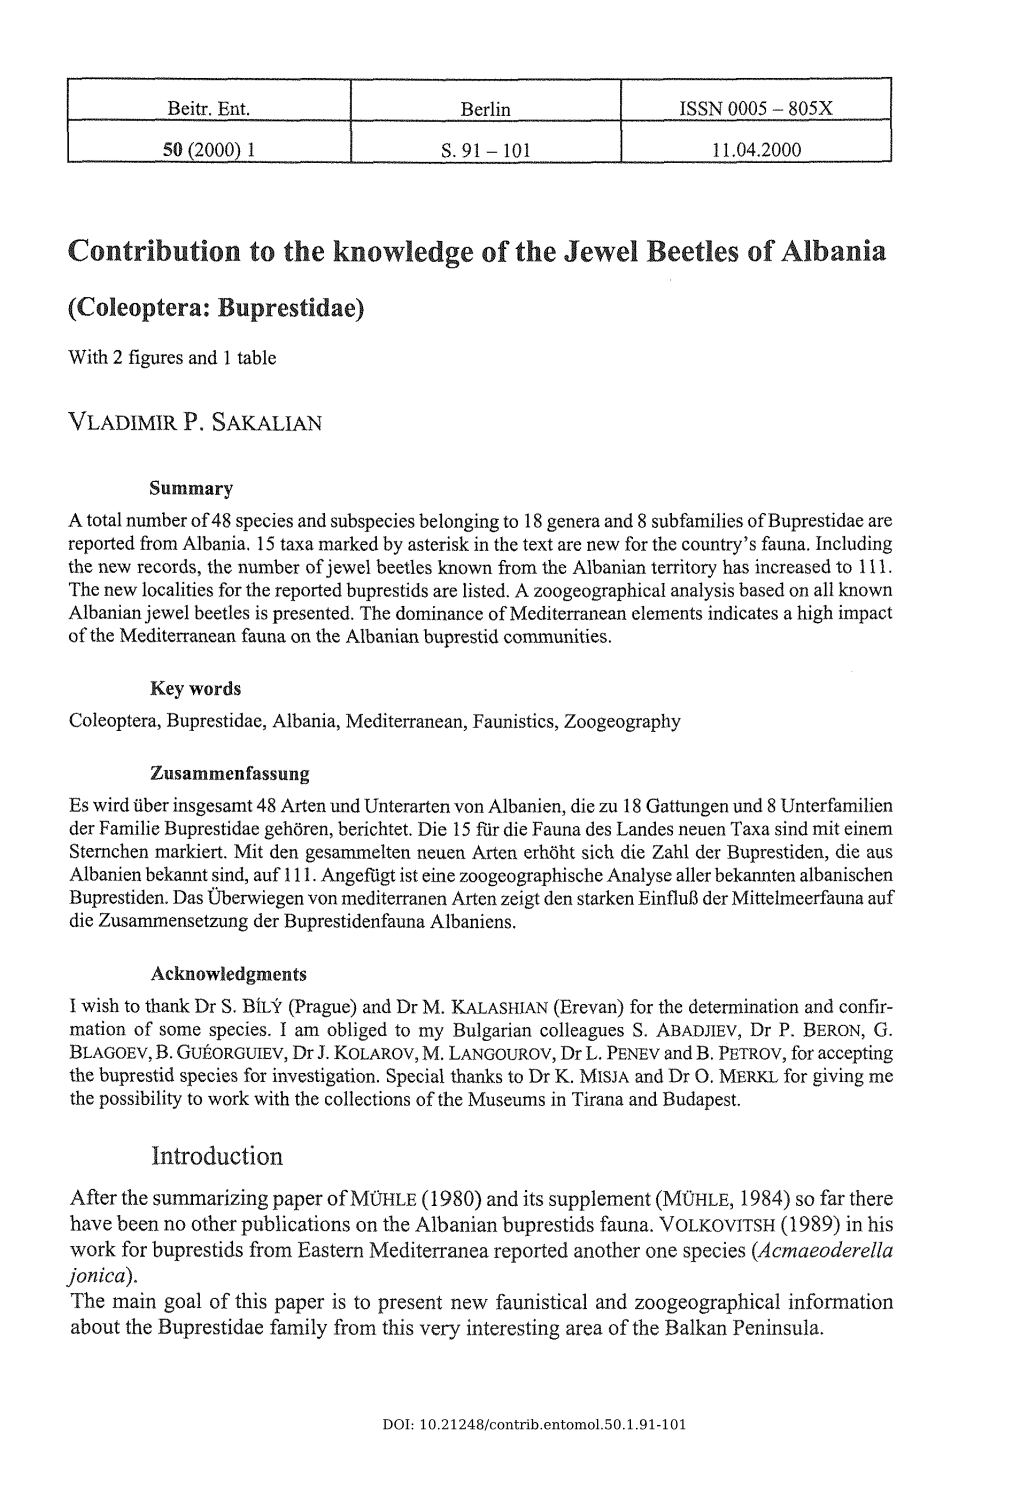 Contribution to the Knowledge of the Jewel Beetles of Albania